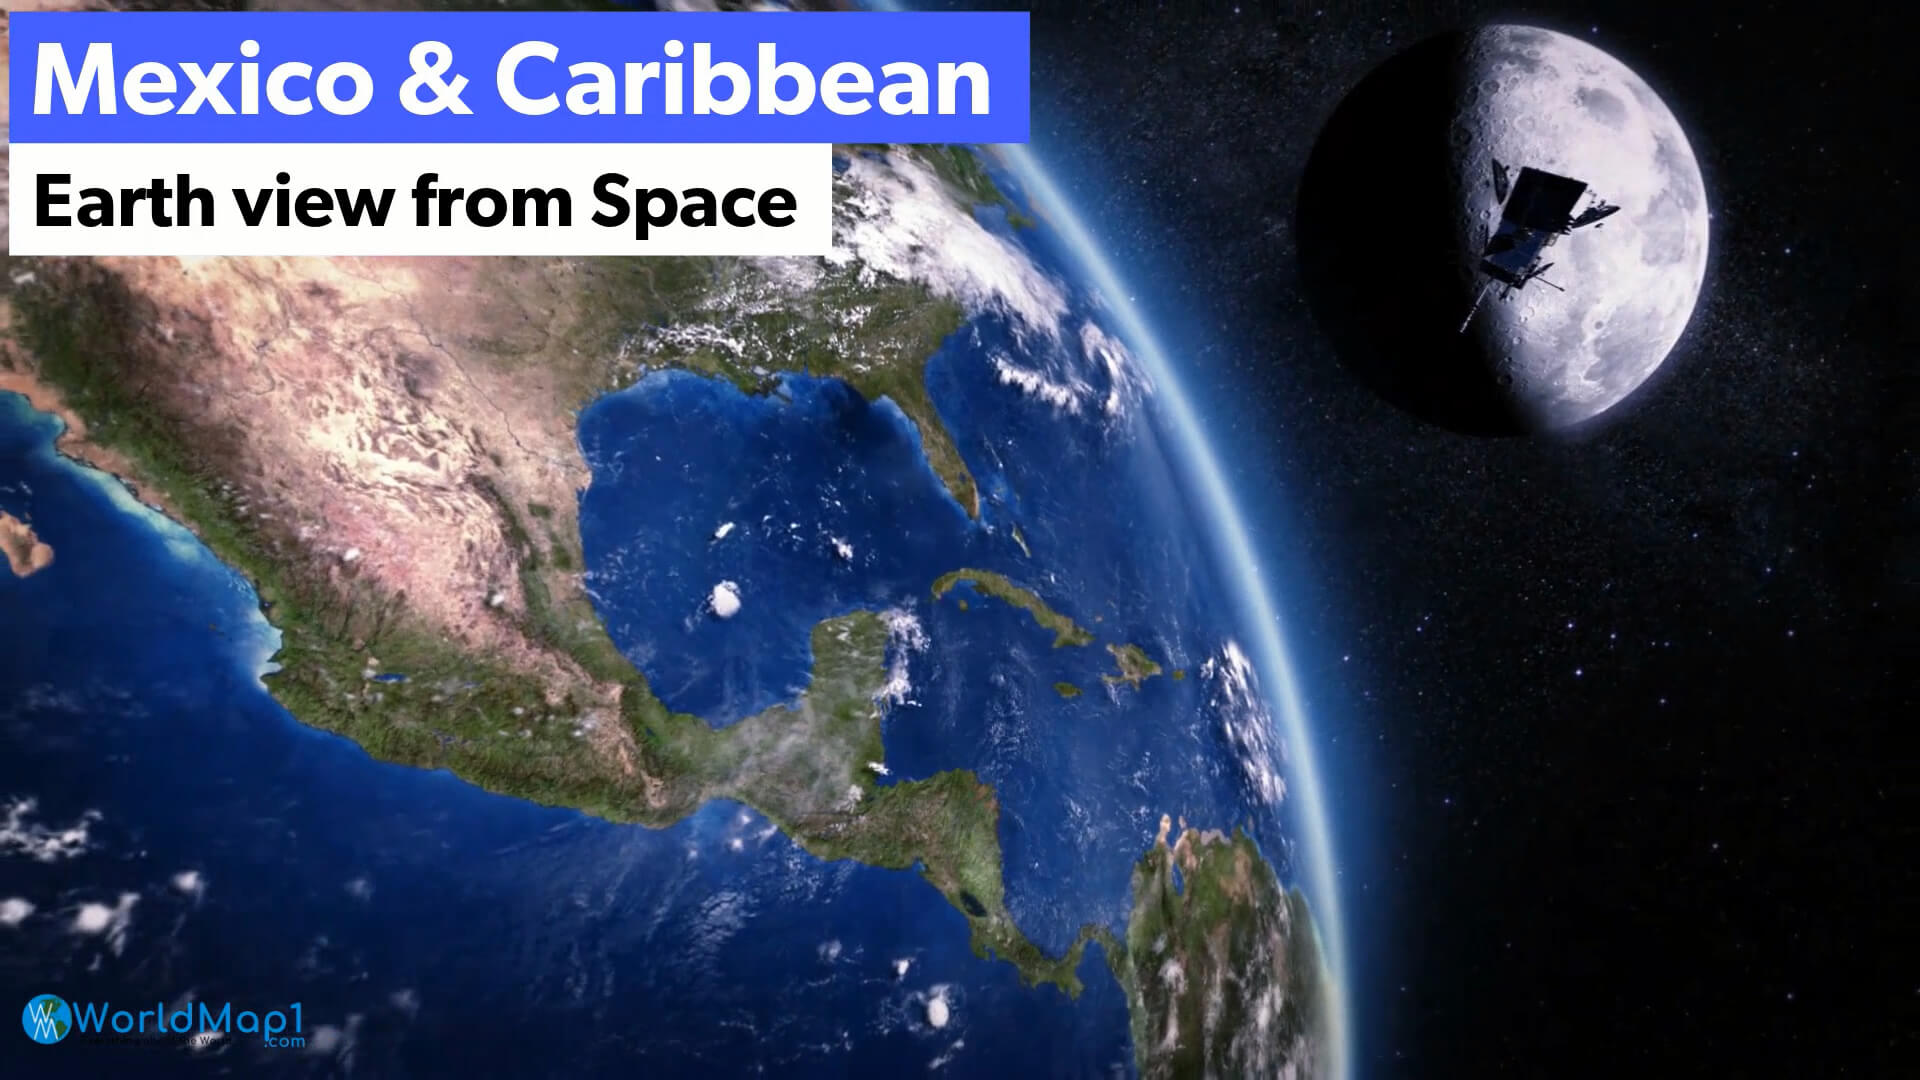 Mexico and Caribbean Earth View